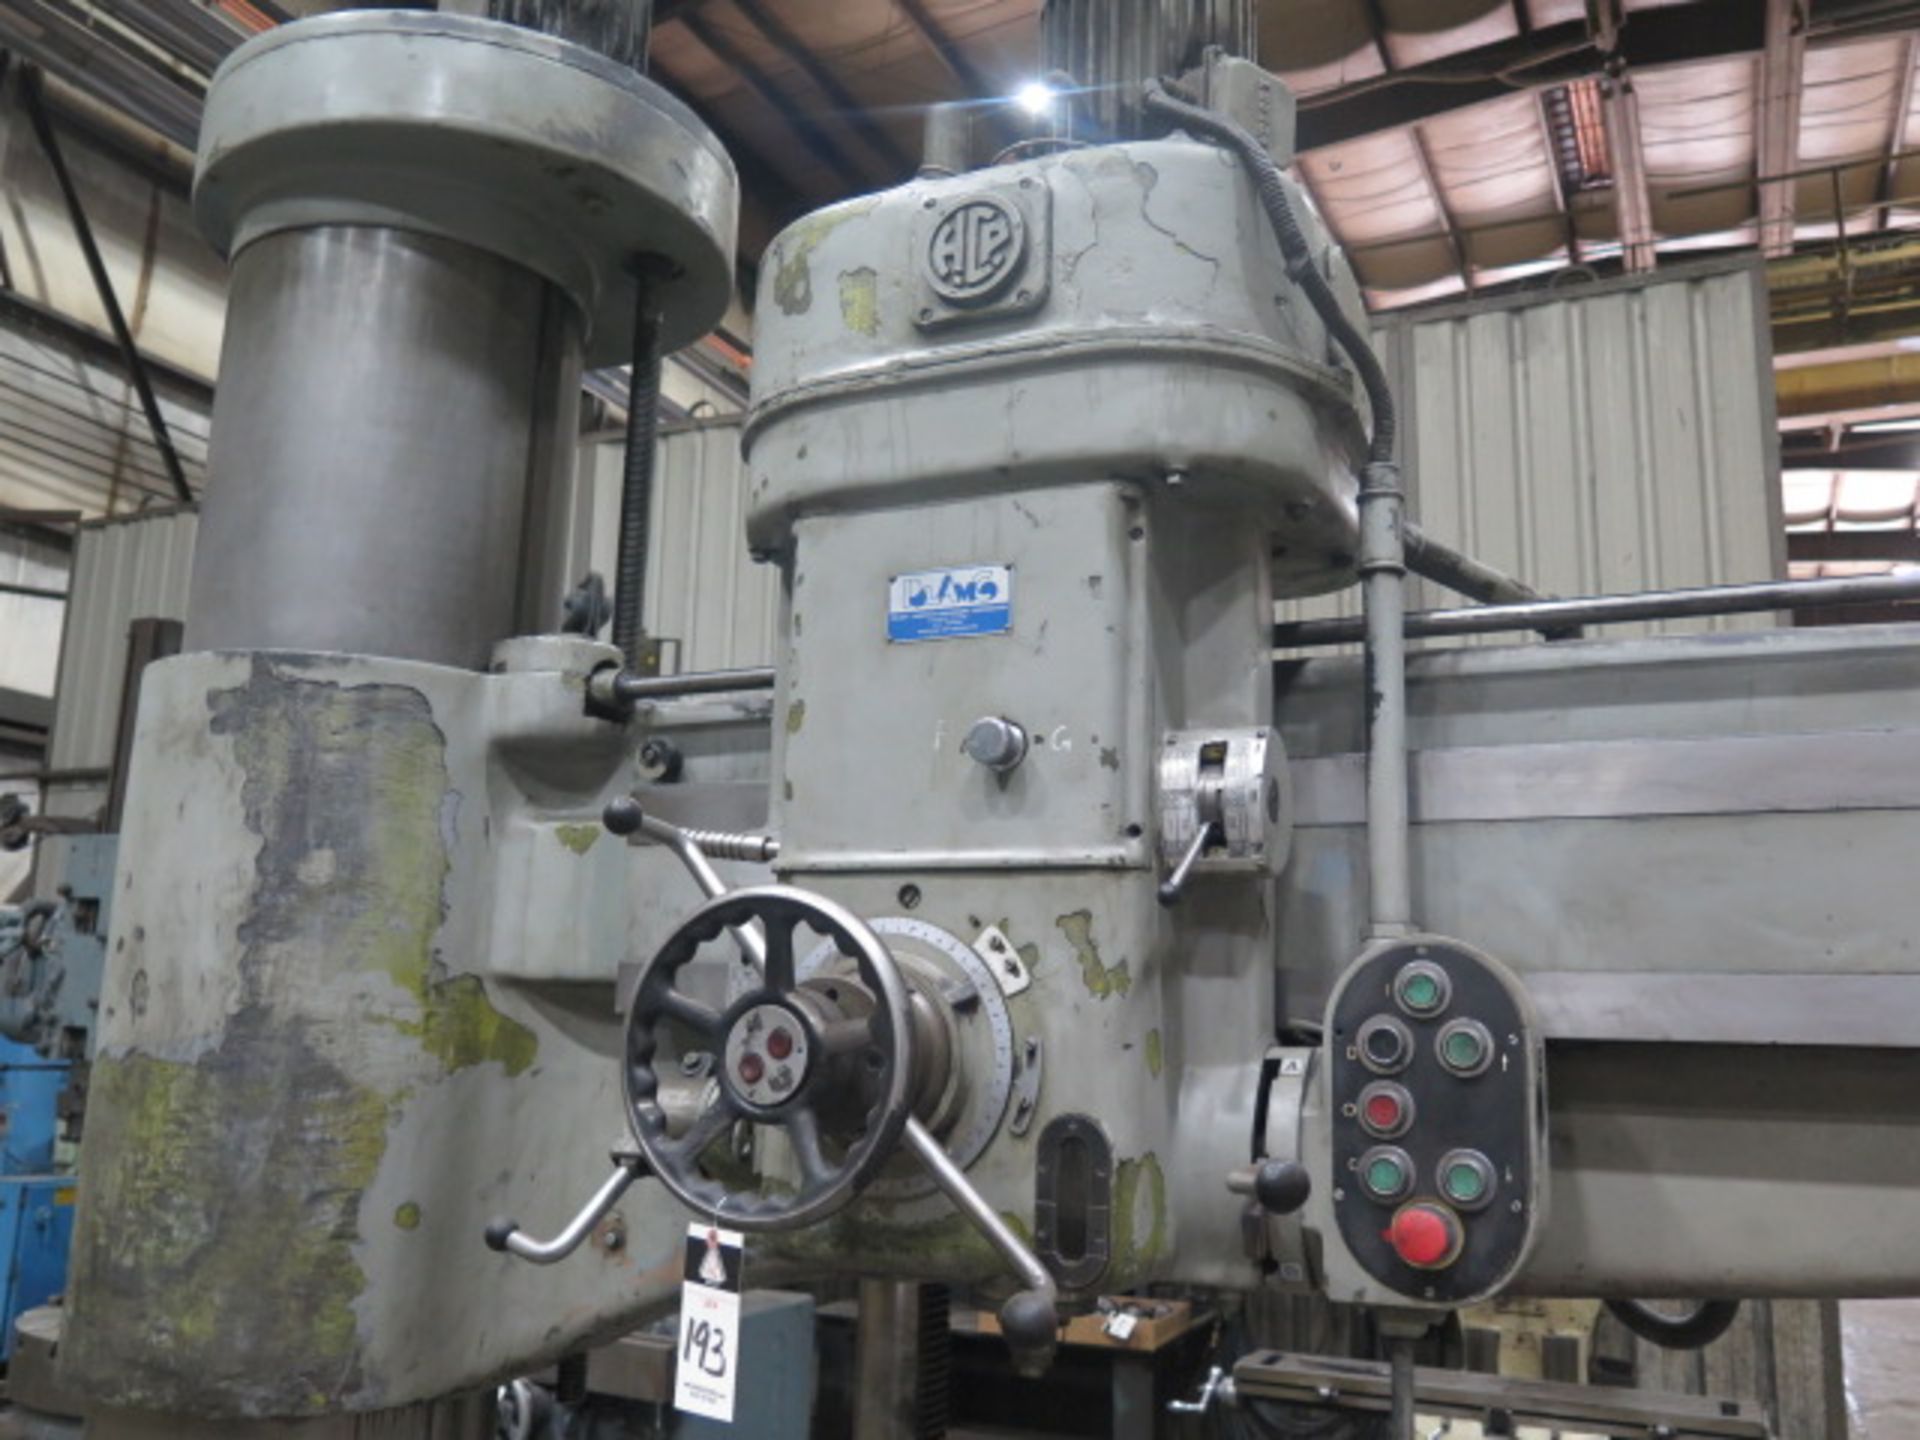 Polamco 17” Column x 60” Radial Arm Drill w/ 30-1700 RPM, Power Column and Feeds - Image 4 of 8